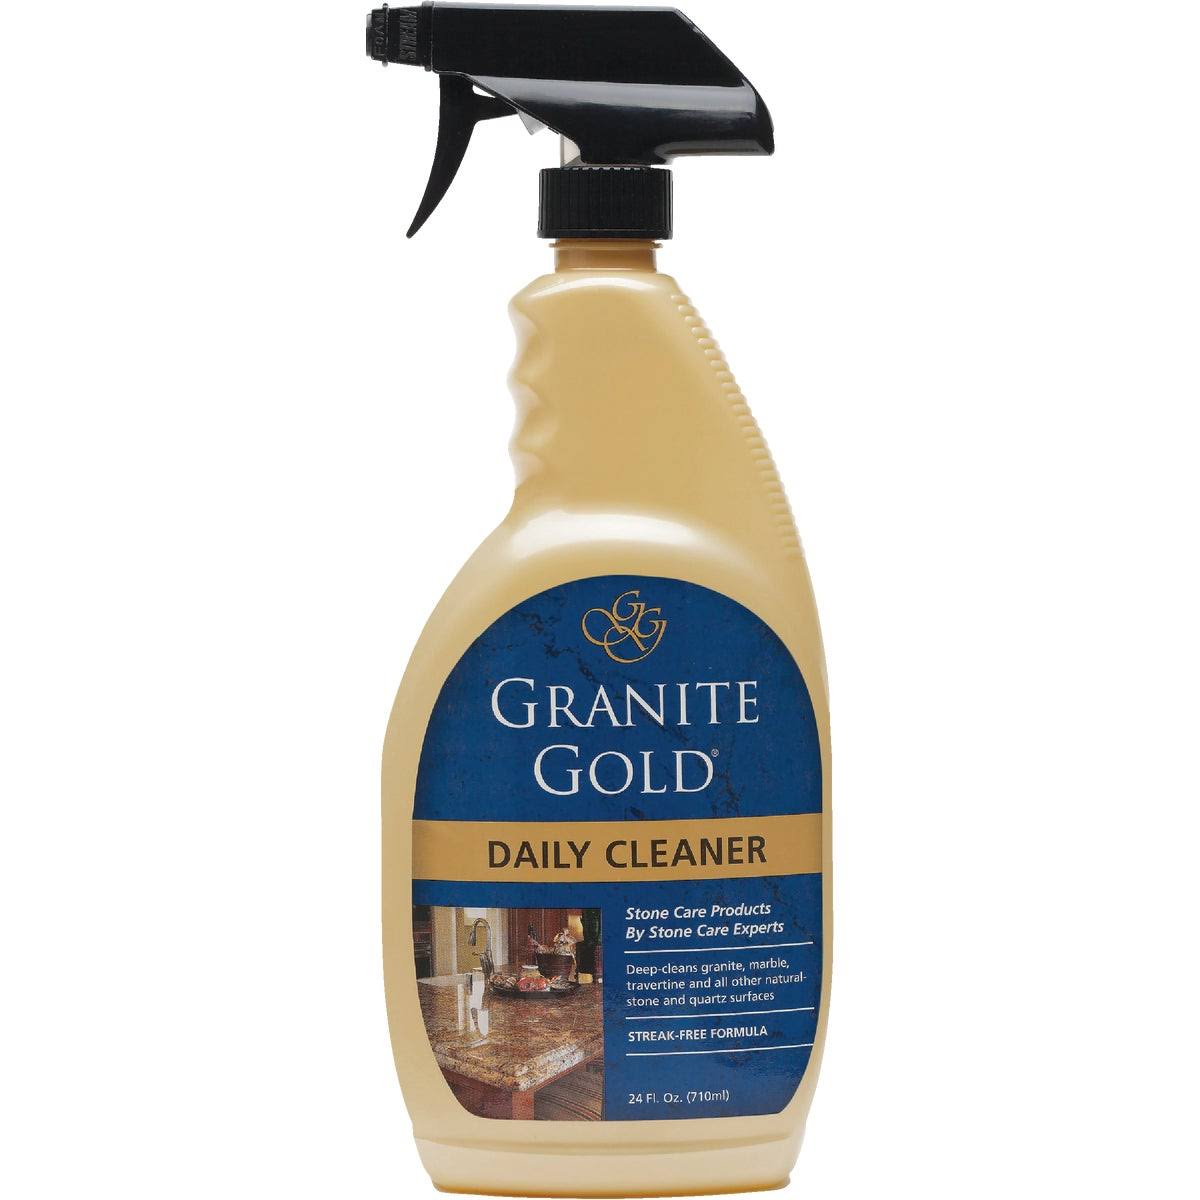 Granite Gold Daily Cleaner - 24 oz